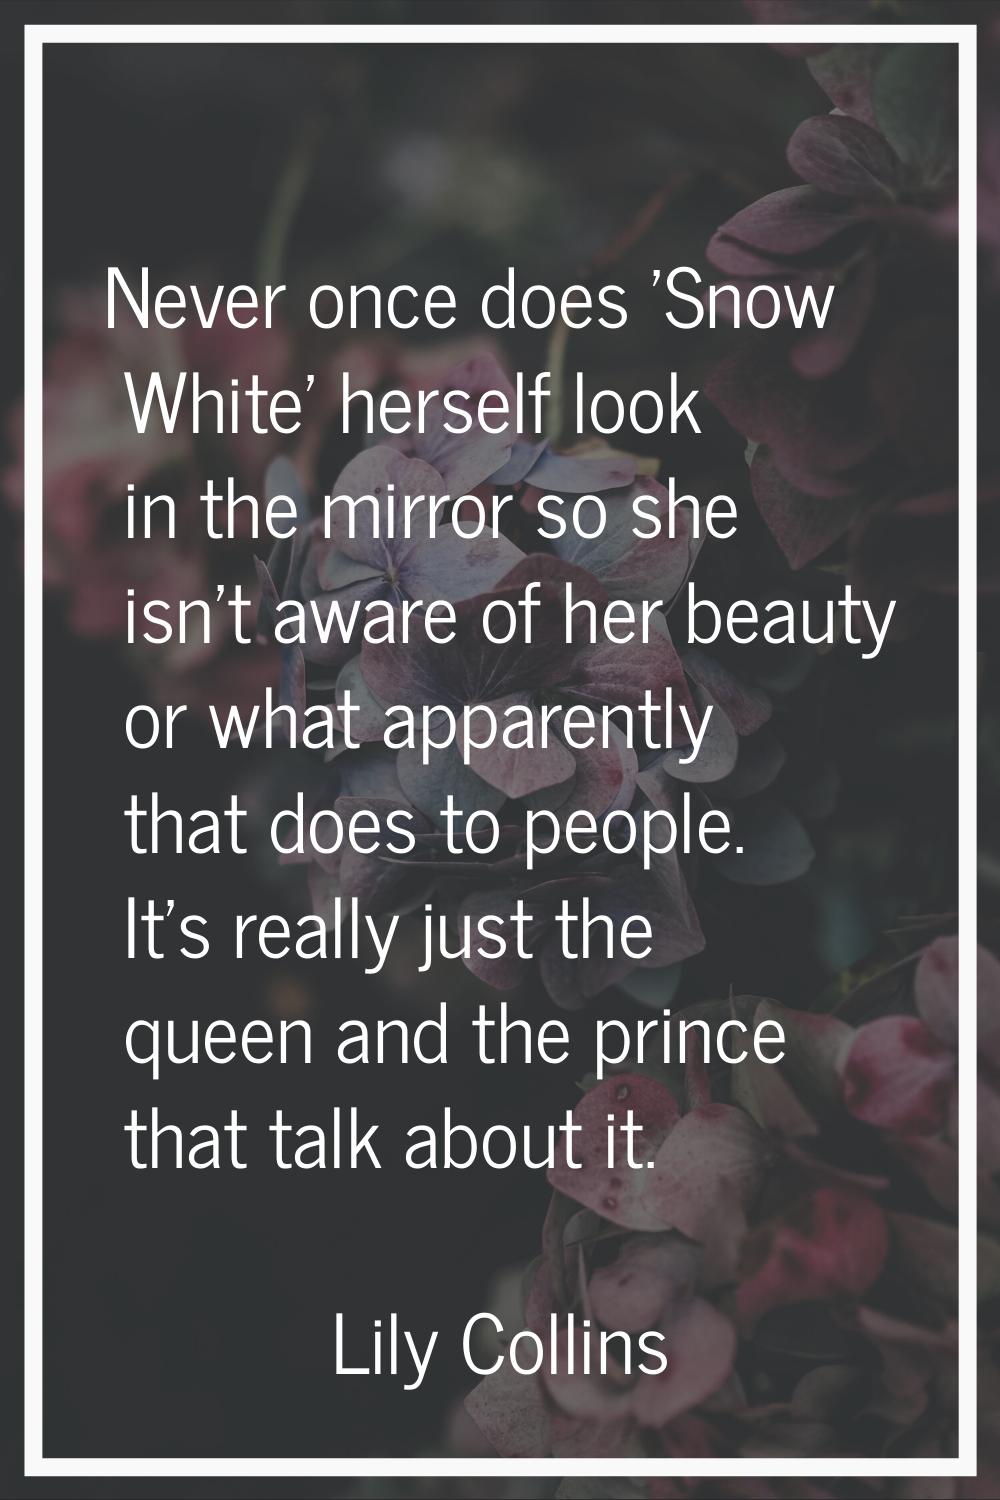 Never once does 'Snow White' herself look in the mirror so she isn't aware of her beauty or what ap